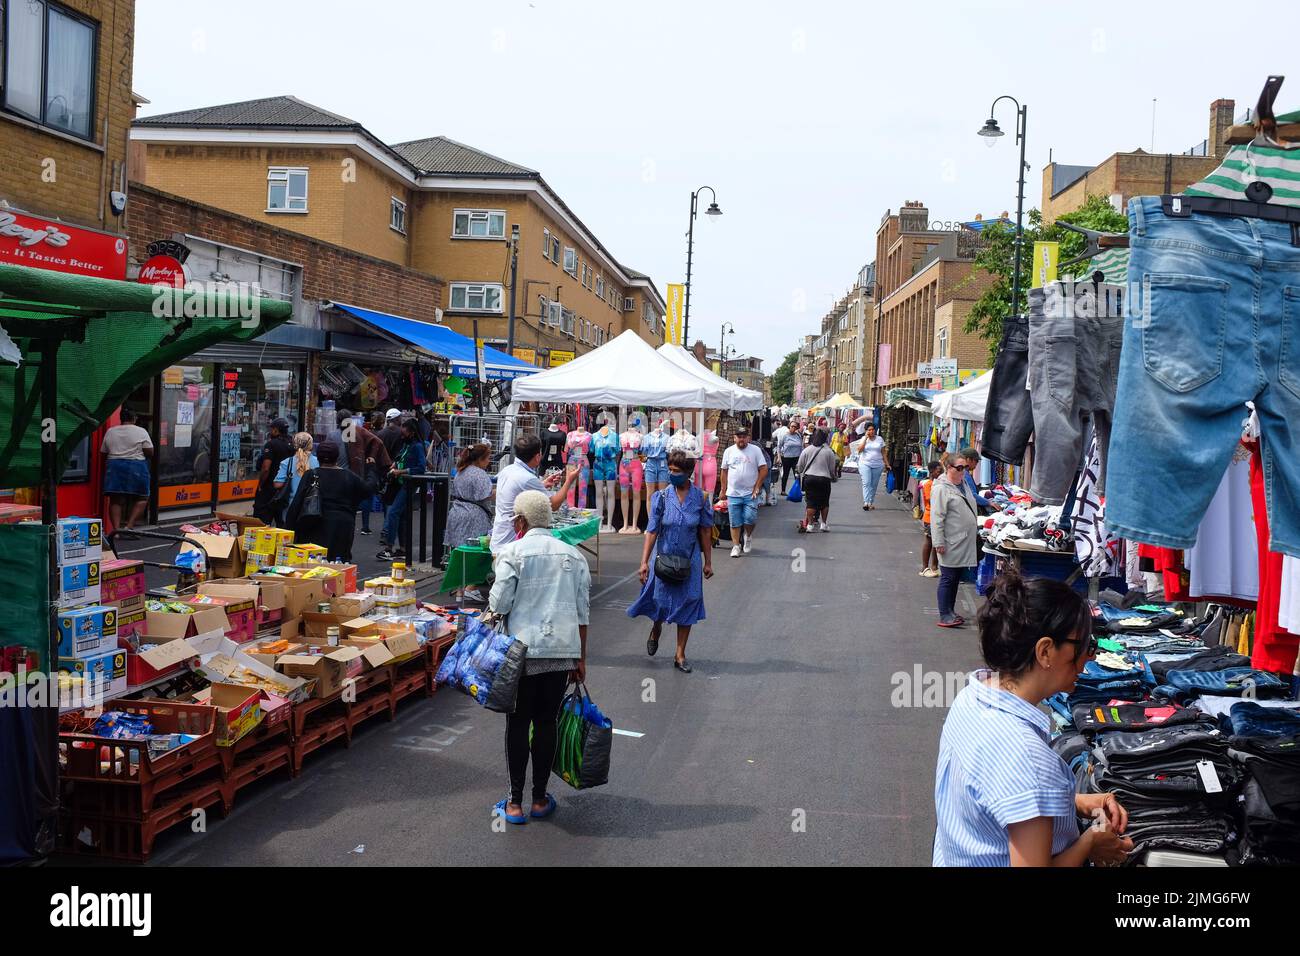 East Street Market, known by locals as 'The Lane,' or 'East Lane,' is a street market in Walworth, south London. Stock Photo